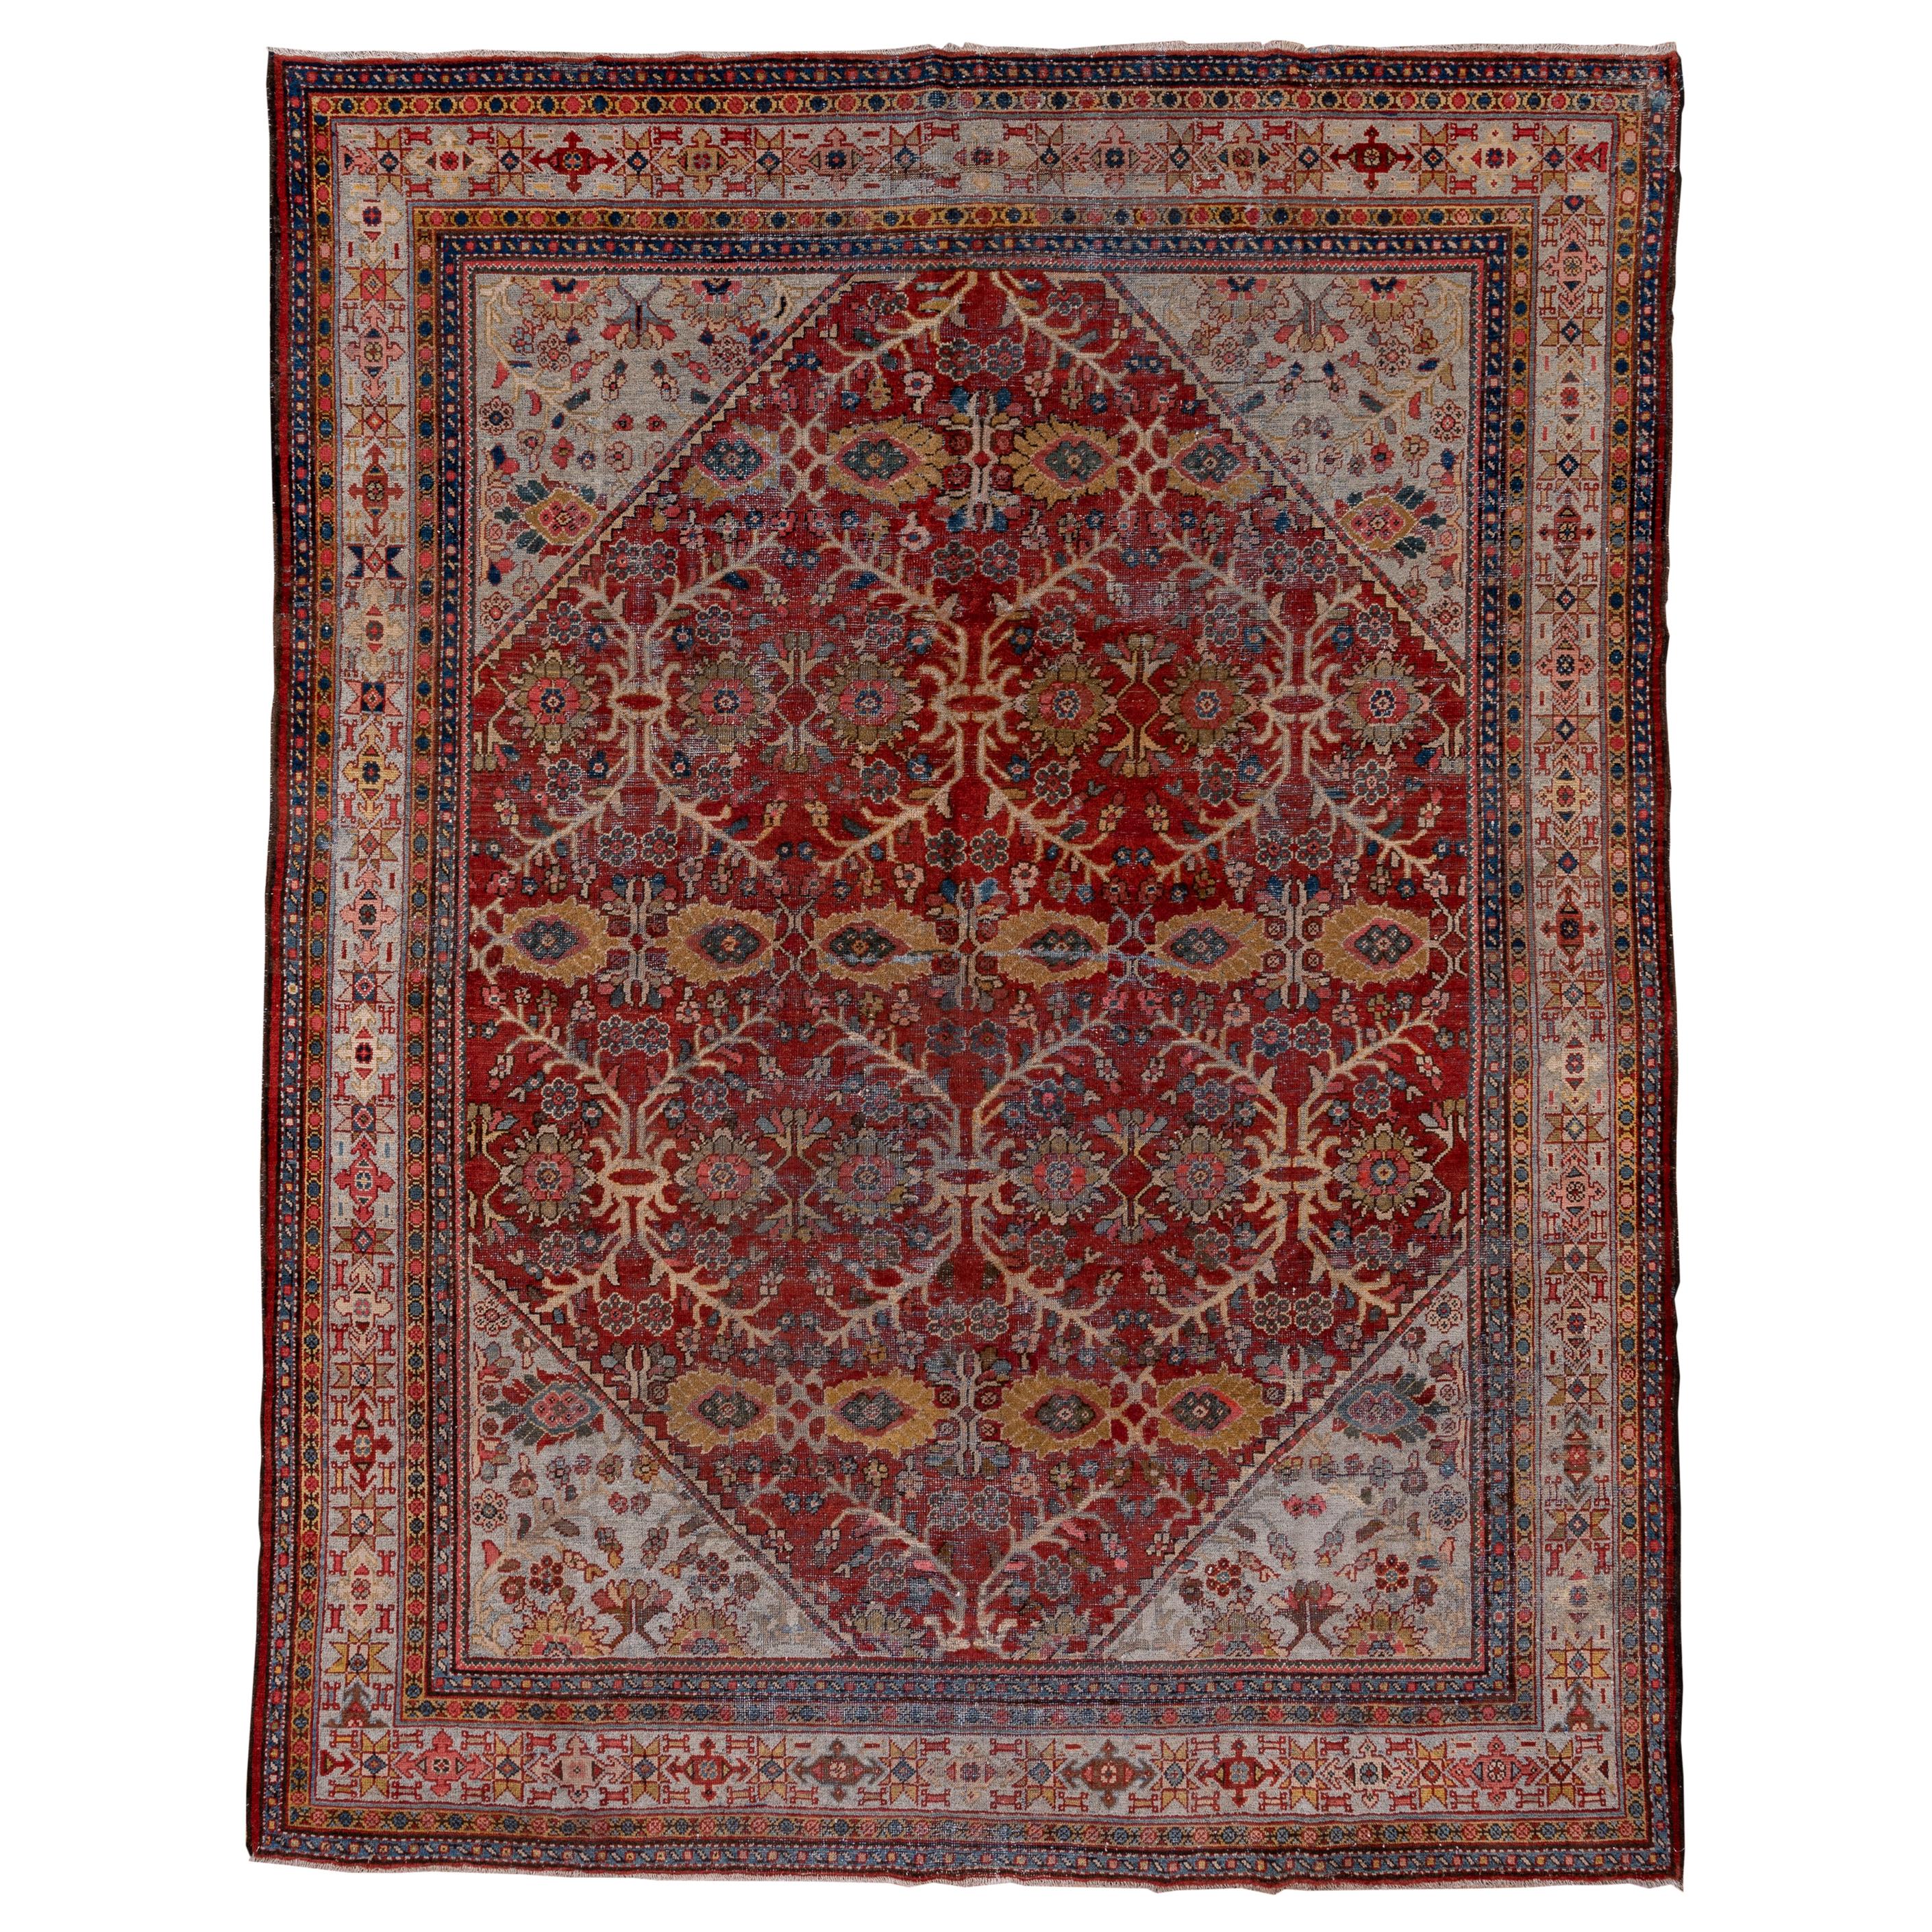 Antique Persian Mahal Rug, Light Gray Borders, Red and Gray Field, circa 1930s